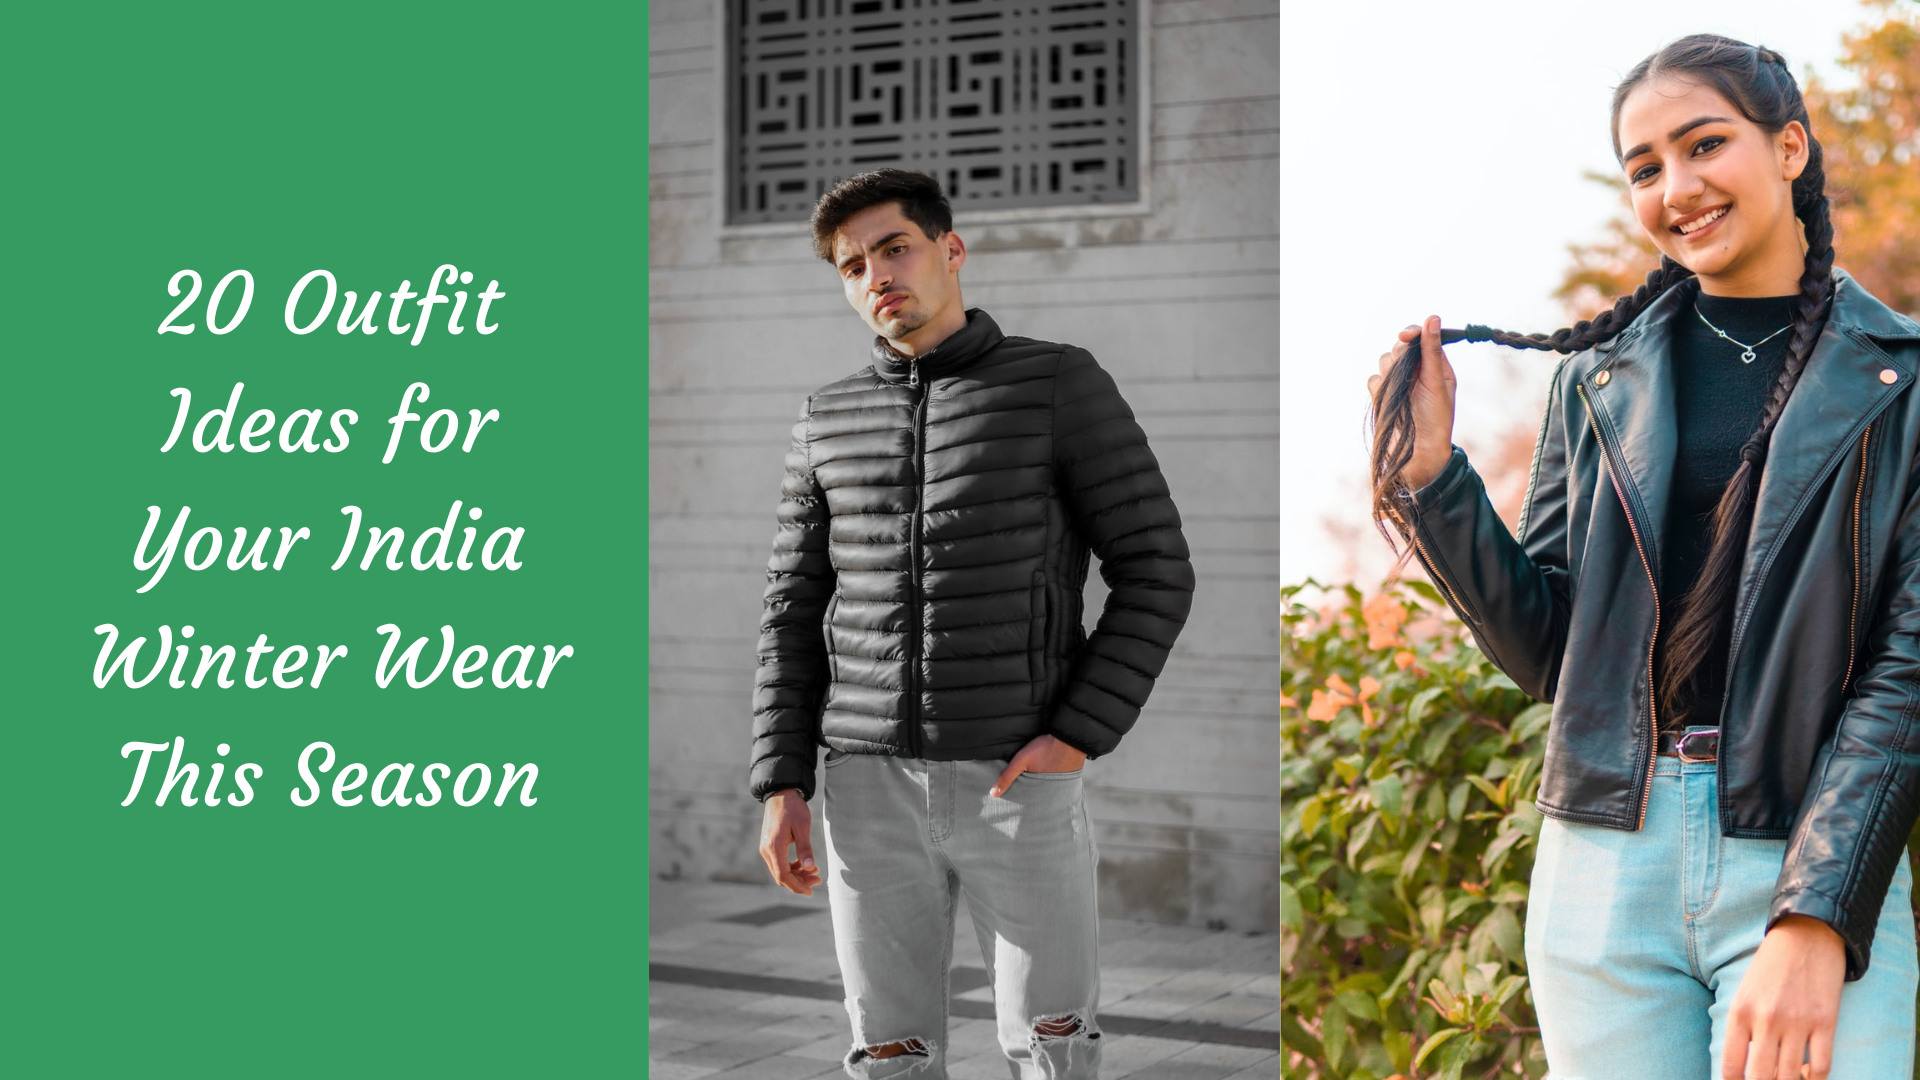 20 Outfit Ideas for Your India Winter Wear This Season - The Kosha Journal